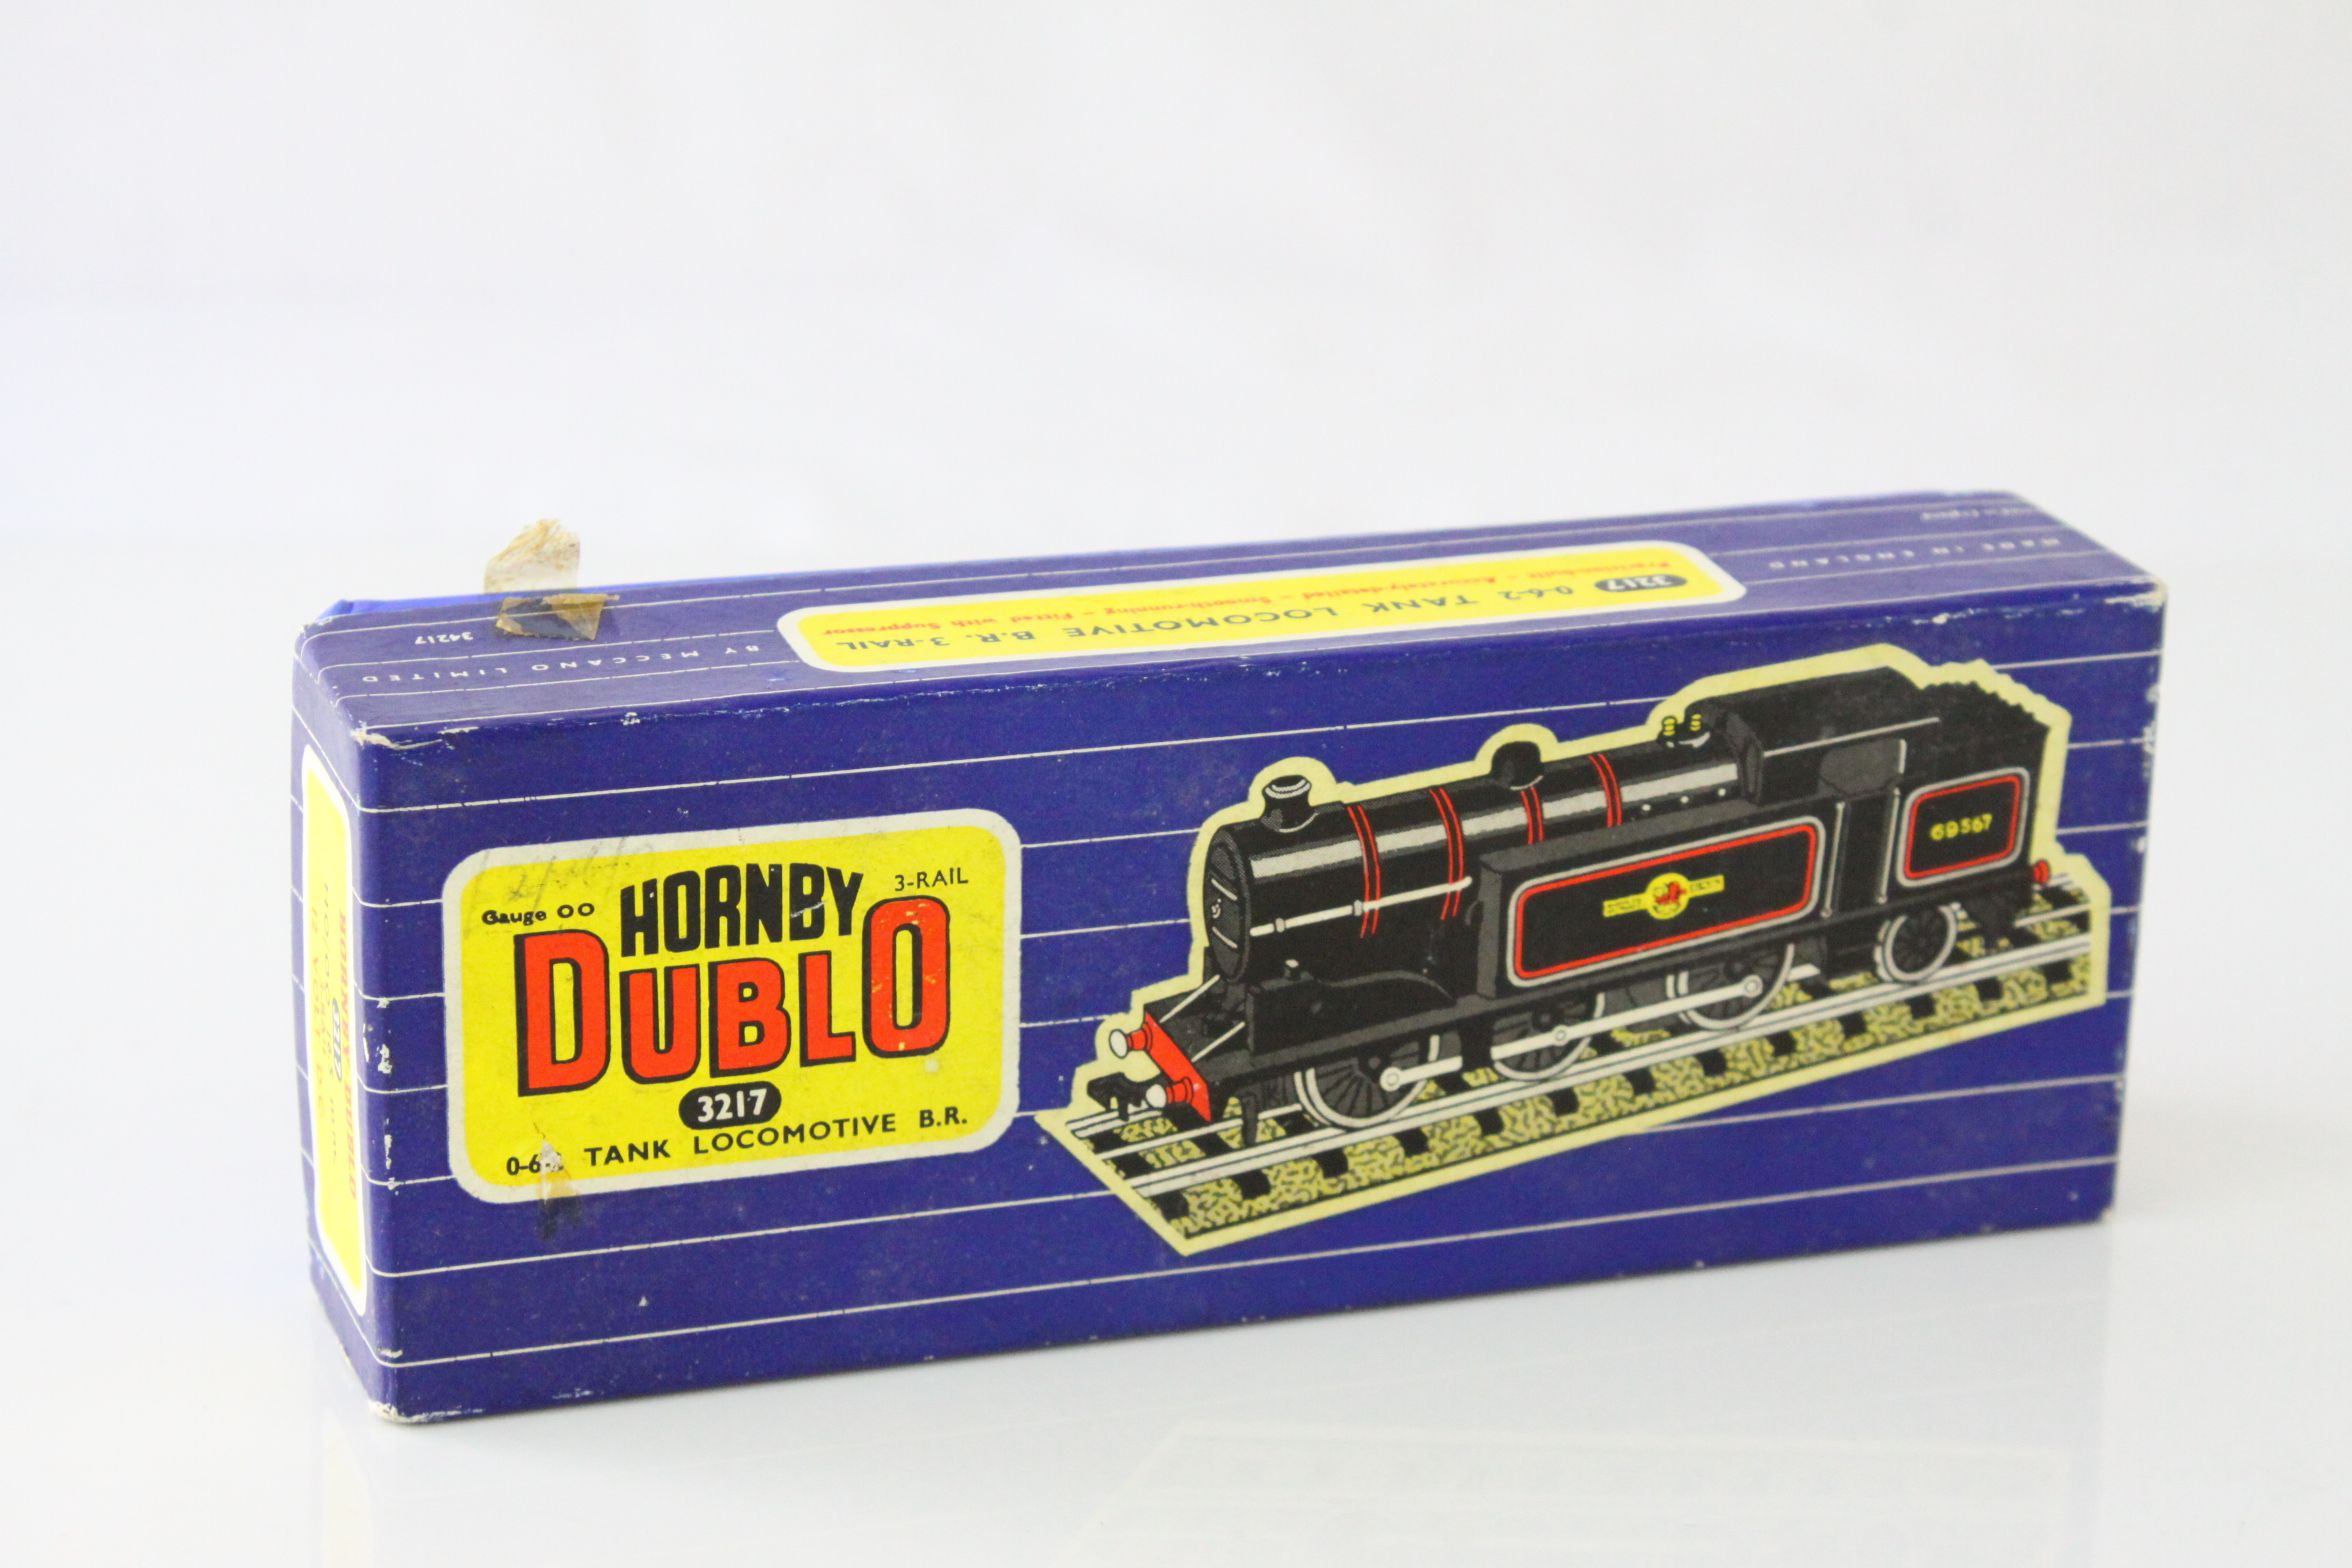 Boxed Hornby Dublo 3217 (3 rail) 0-6-2 Tank Locomotive BR appearing in vg condition - Image 5 of 5